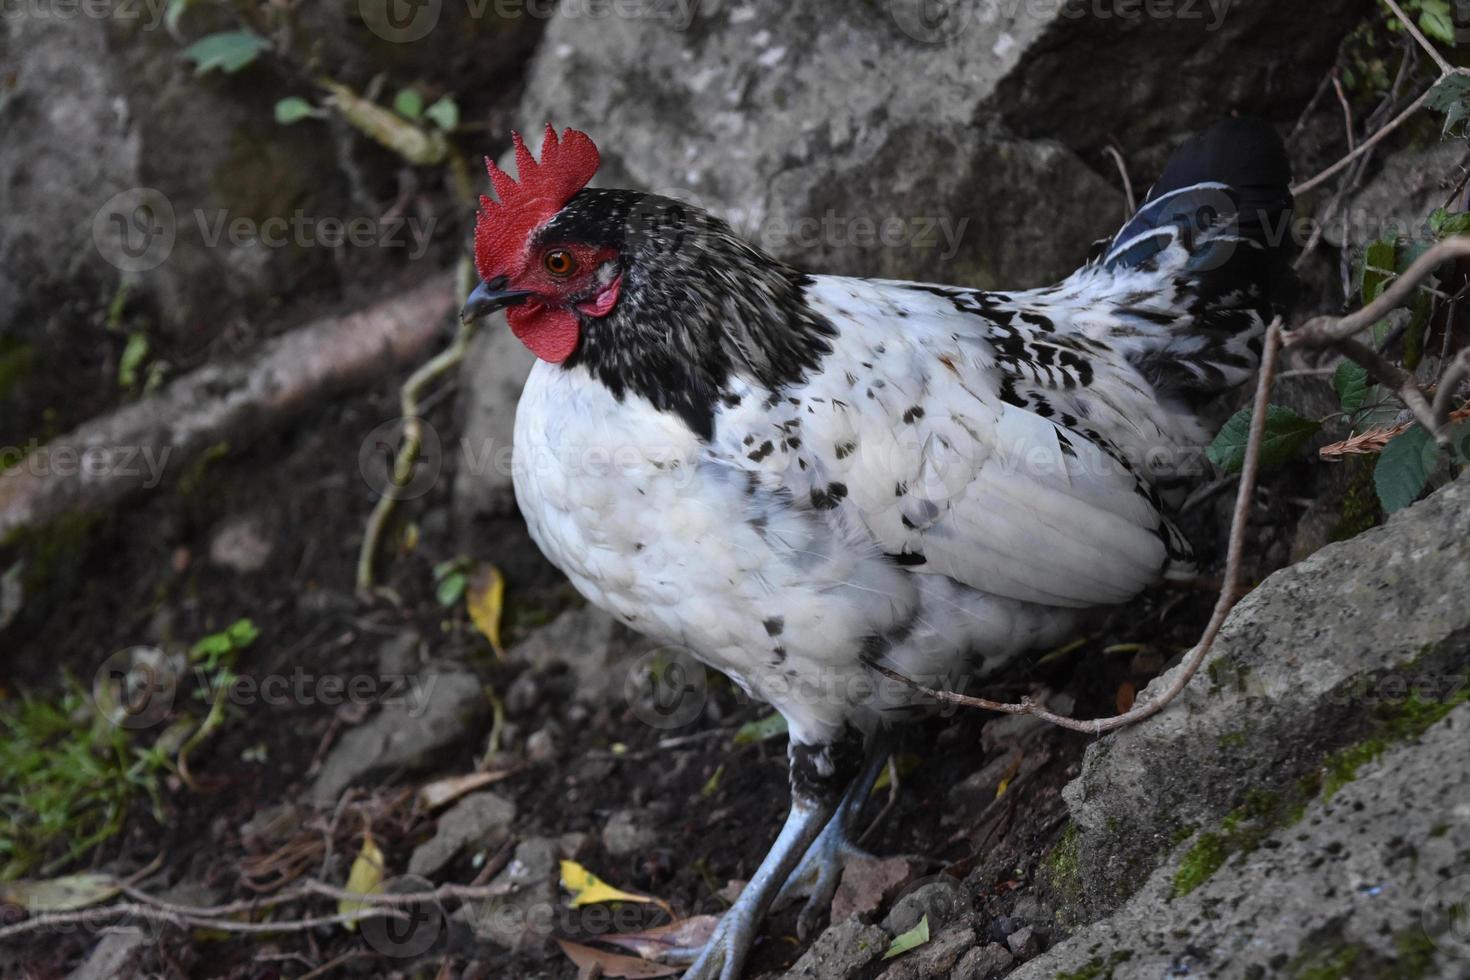 Stunning Black and White Chicken with a Red Crest photo